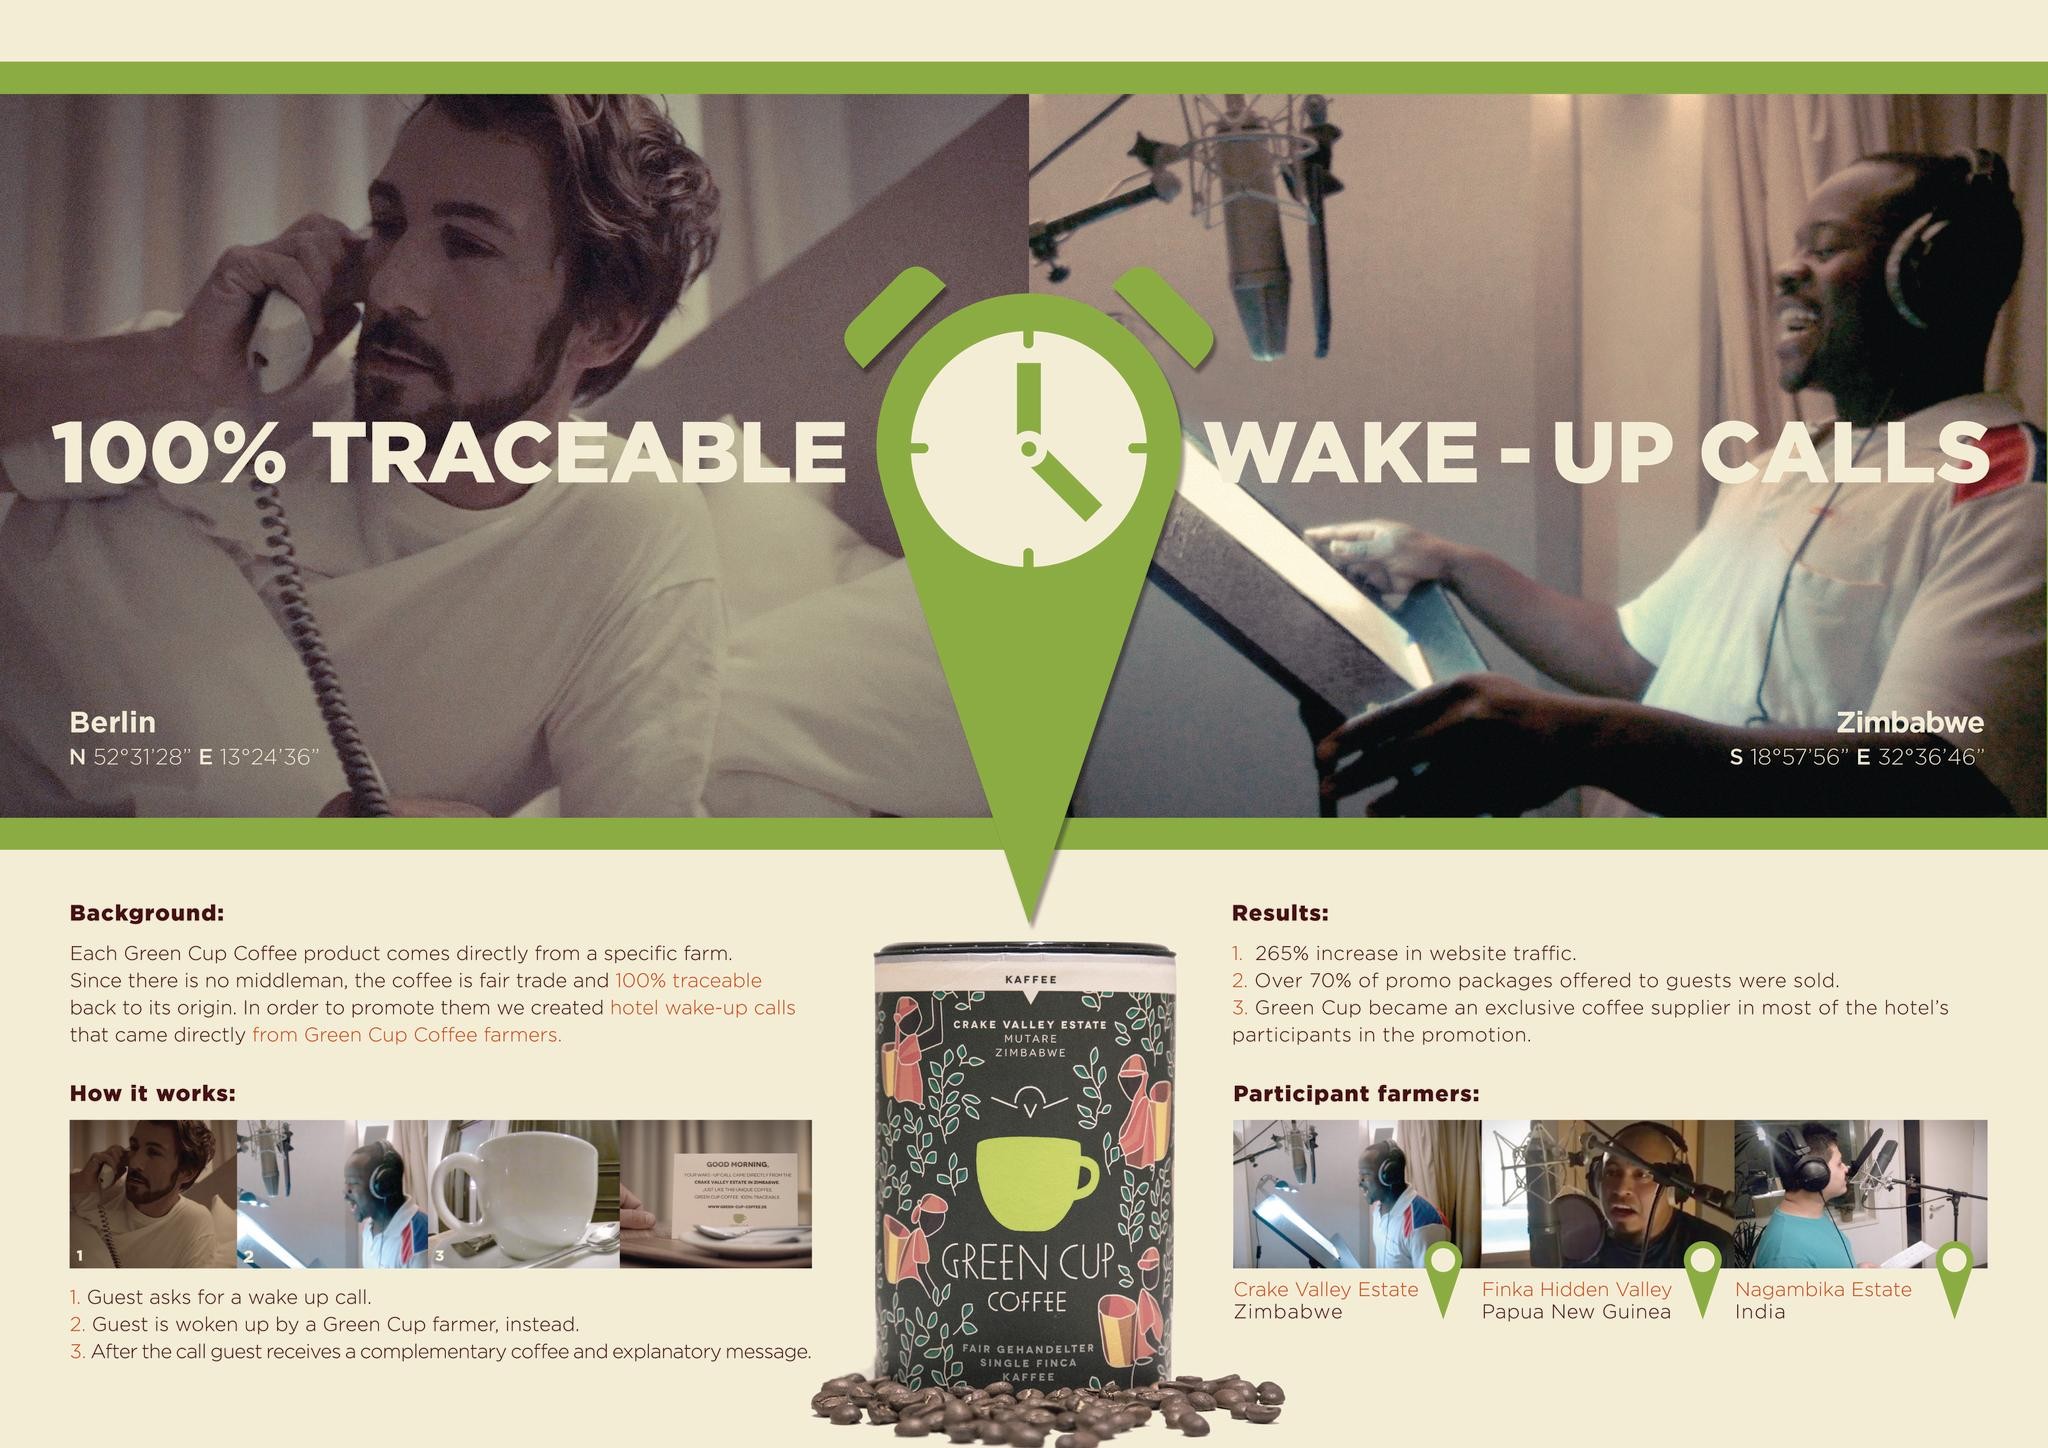 THE 100% TRACEABLE WAKE-UP CALLS